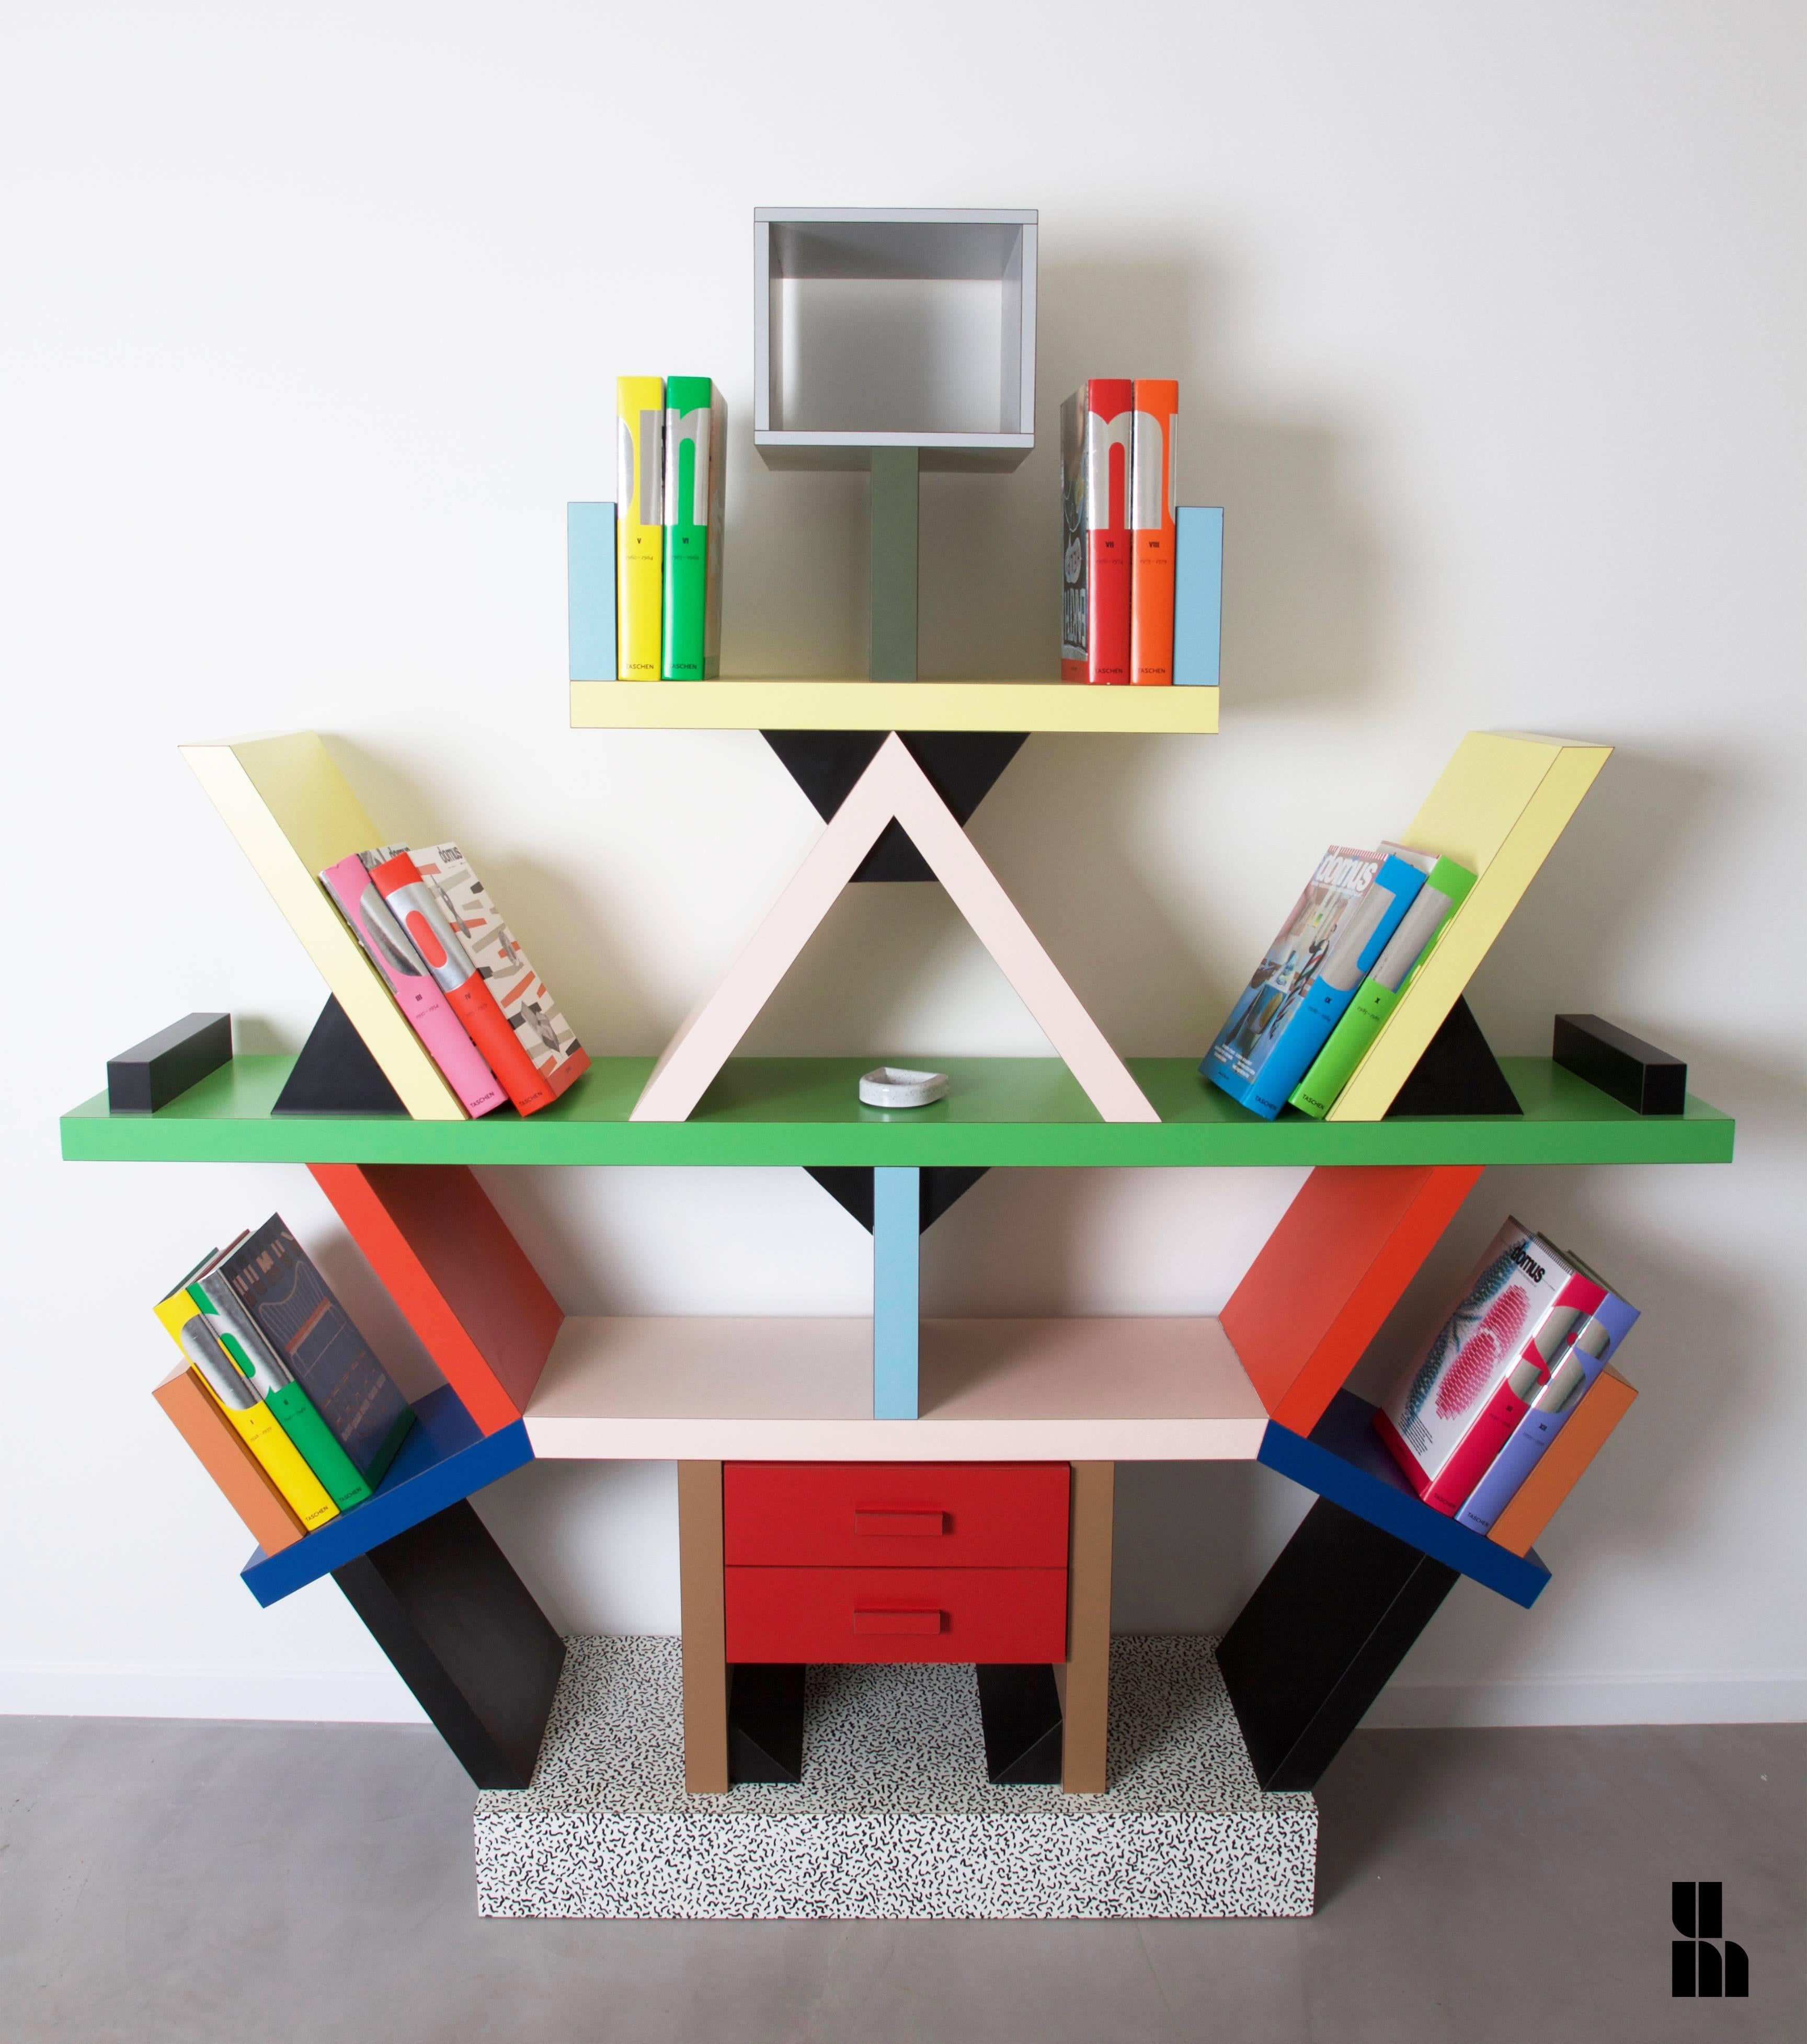 Iconic Carlton bookcase designed by Ettore Sottsass in 1981.
Near mint original condition with the original Memphis stamp.
Historical museum piece, appears in Moma (New York) collection.